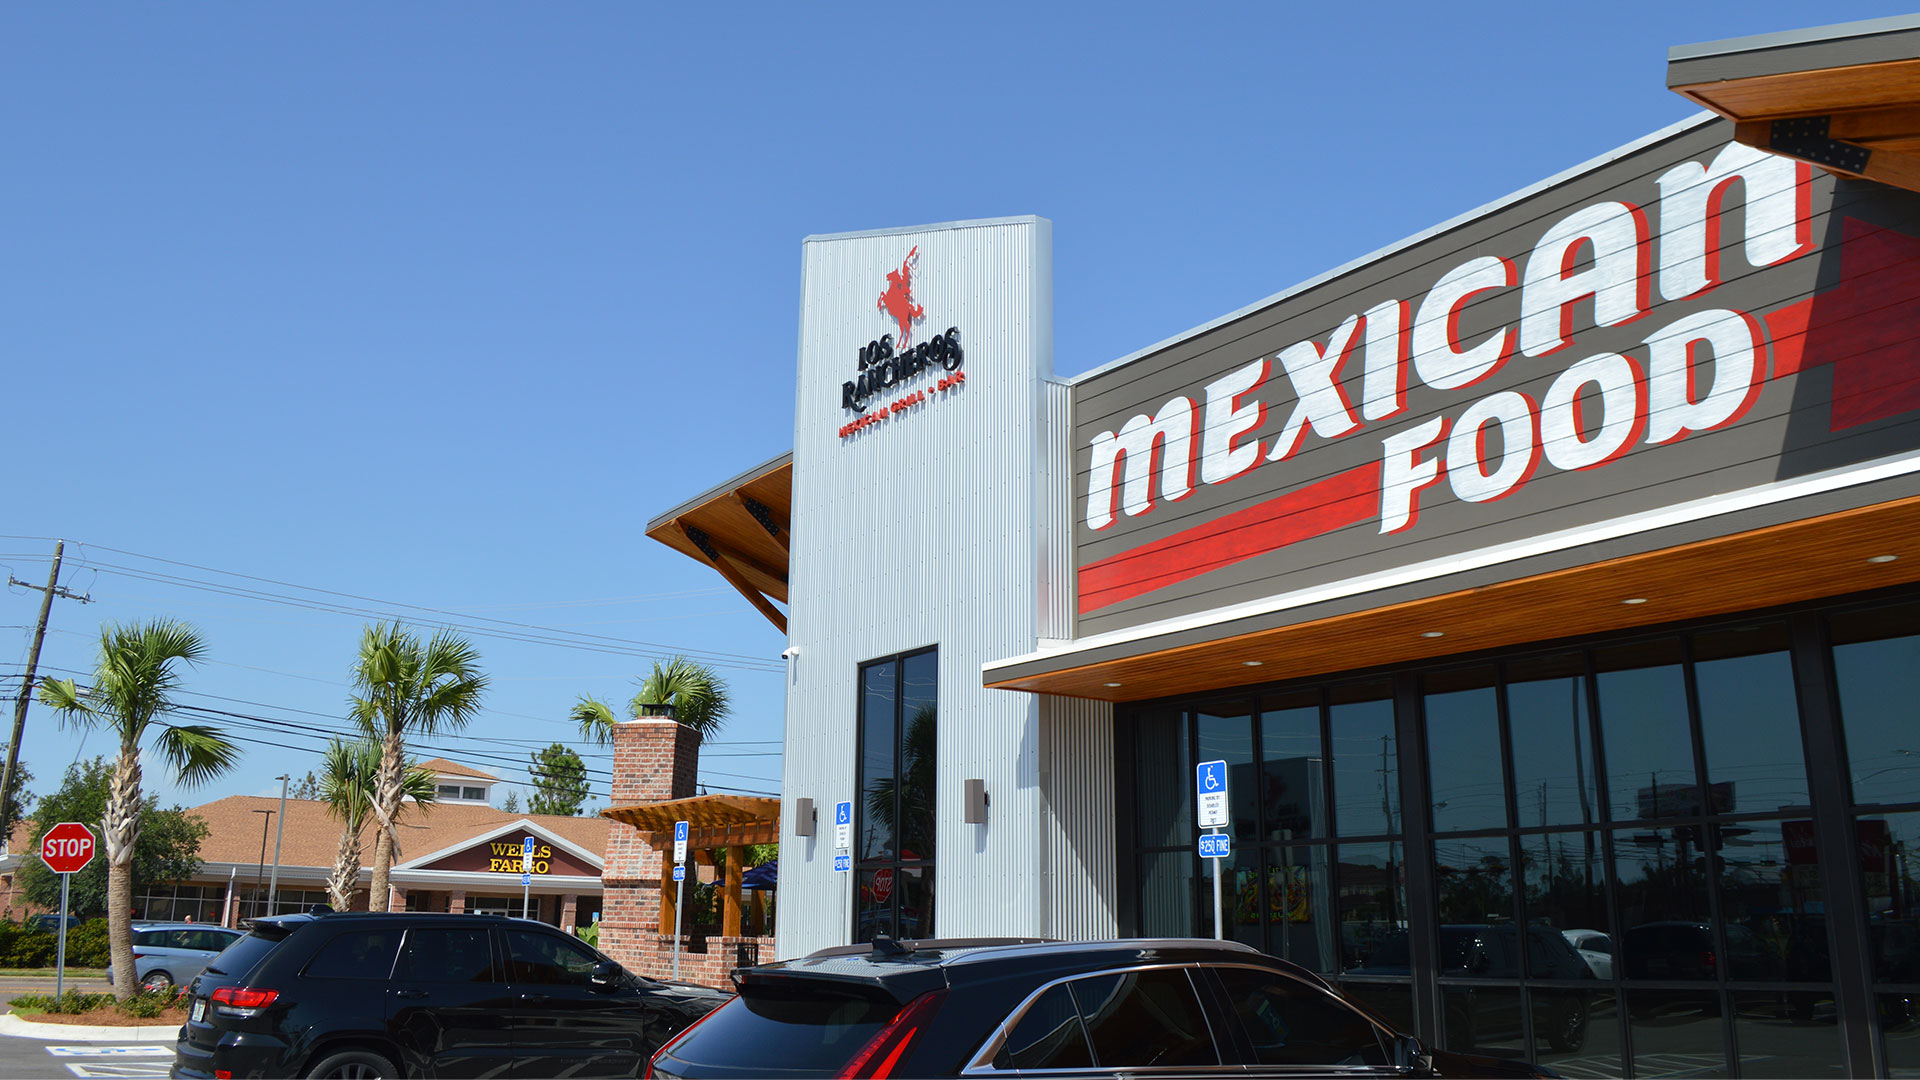 Mexican food for lunch and dinner in Panama City, Florida